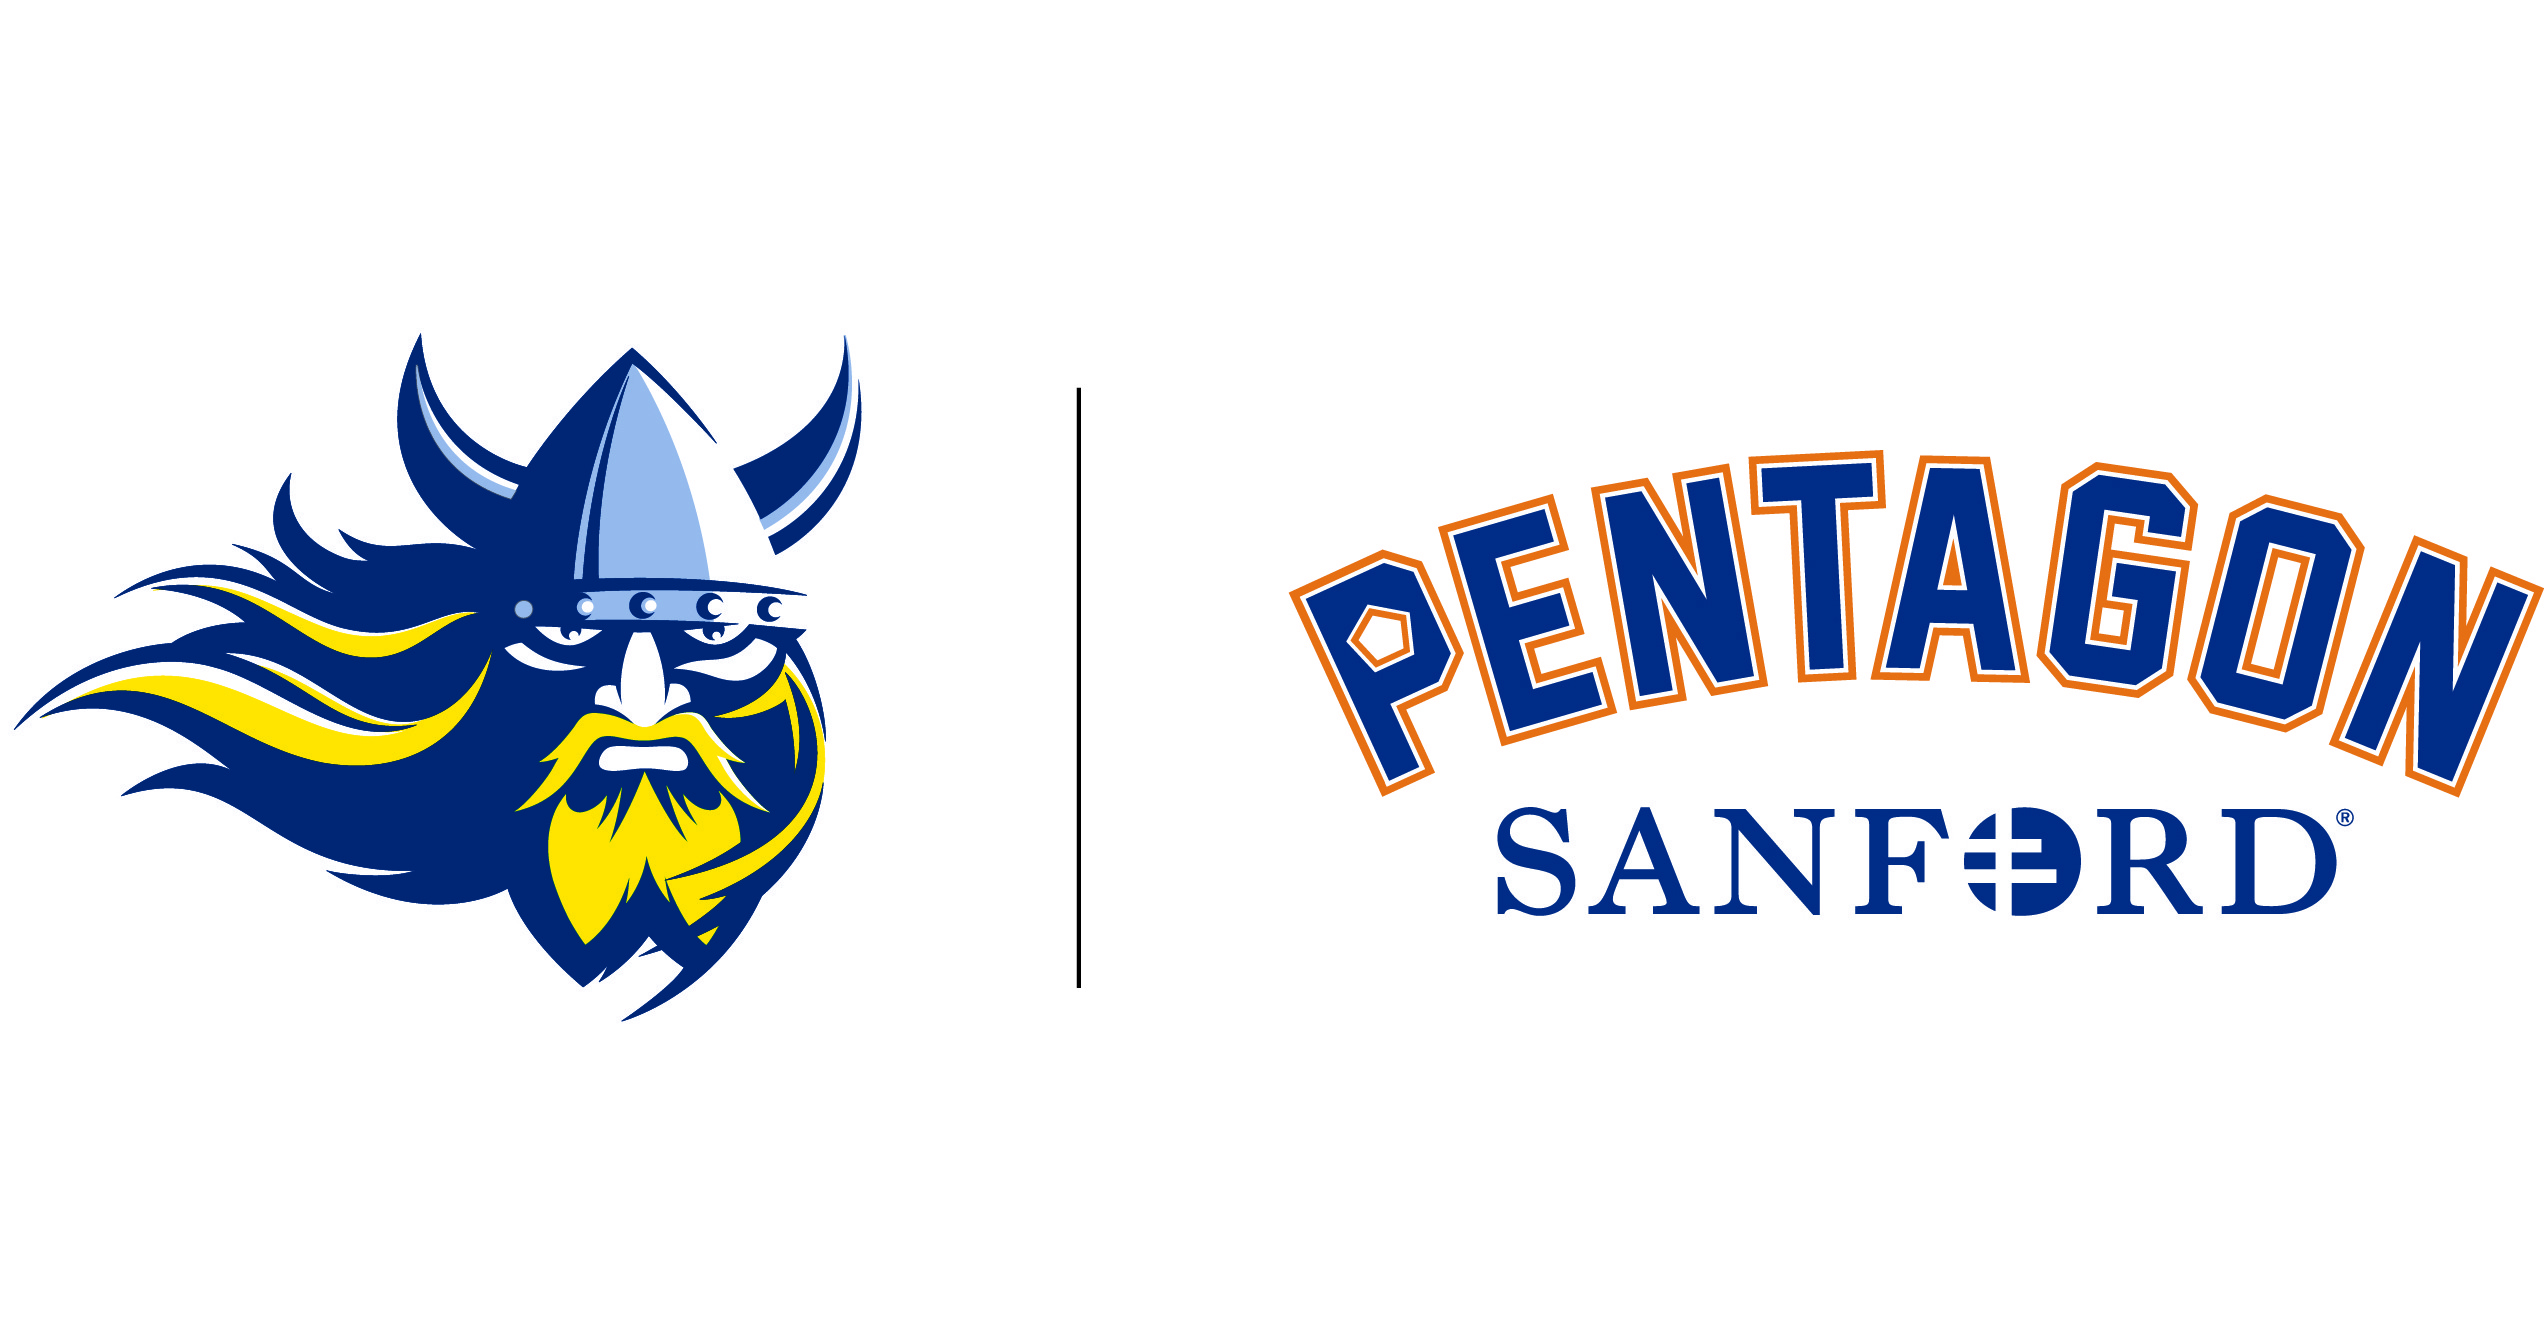 Augustana to play home conference games at Pentagon Sanford Health News